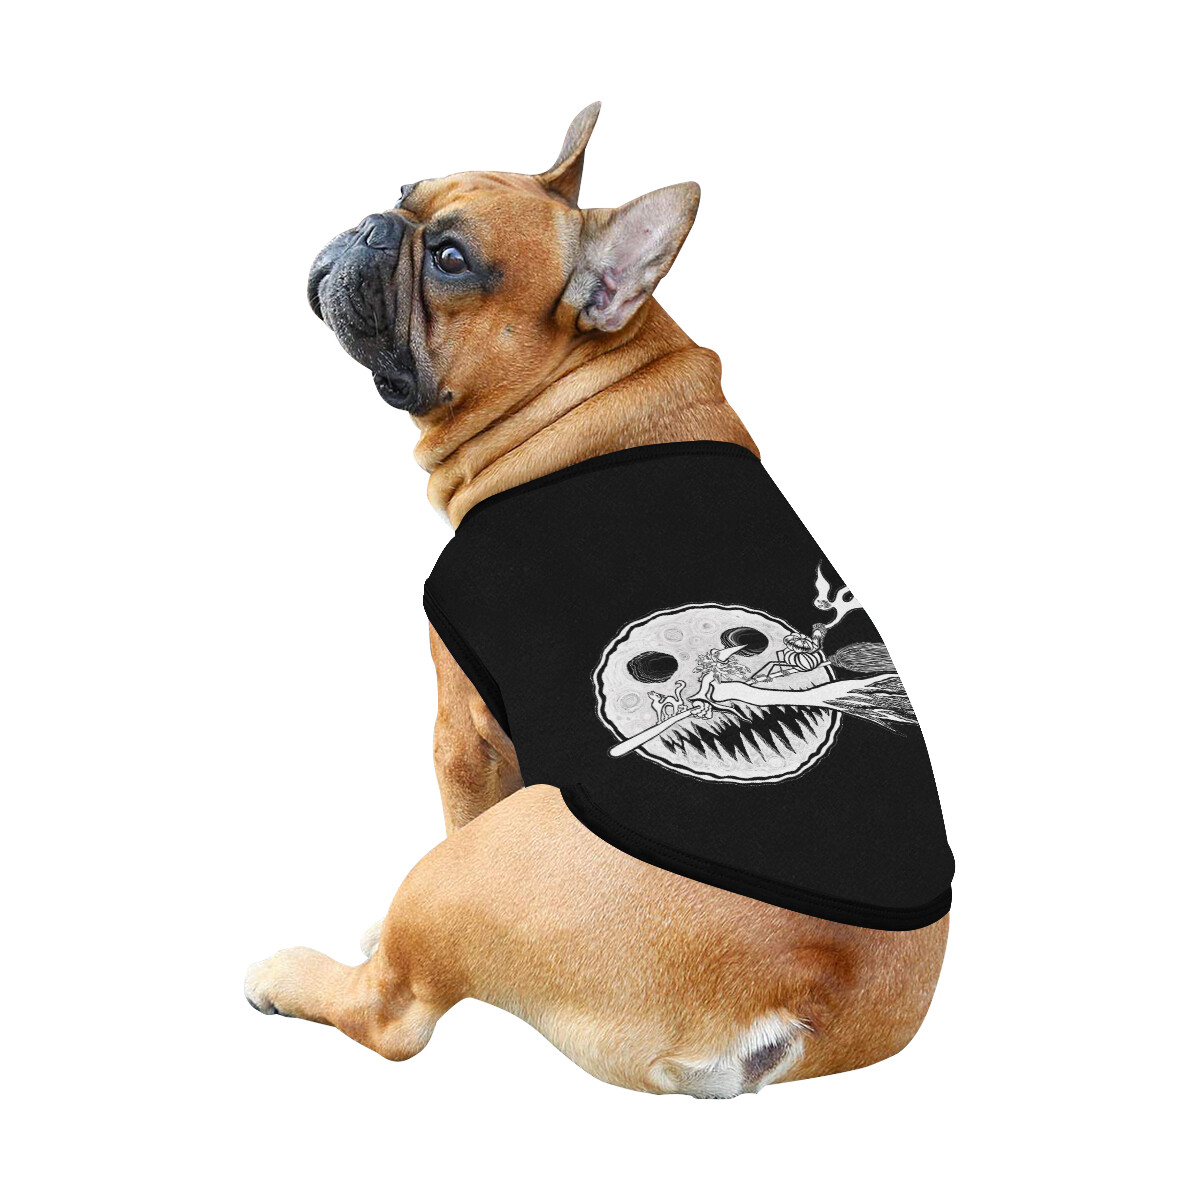 🐕 Halloween Moon Witch Cat Ghosts Pumpkins Snakes Dog shirt, Dog Tank Top, Dog t-shirt, Dog clothes, Gifts, front back print, 7 sizes XS to 3XL, dog gifts, black